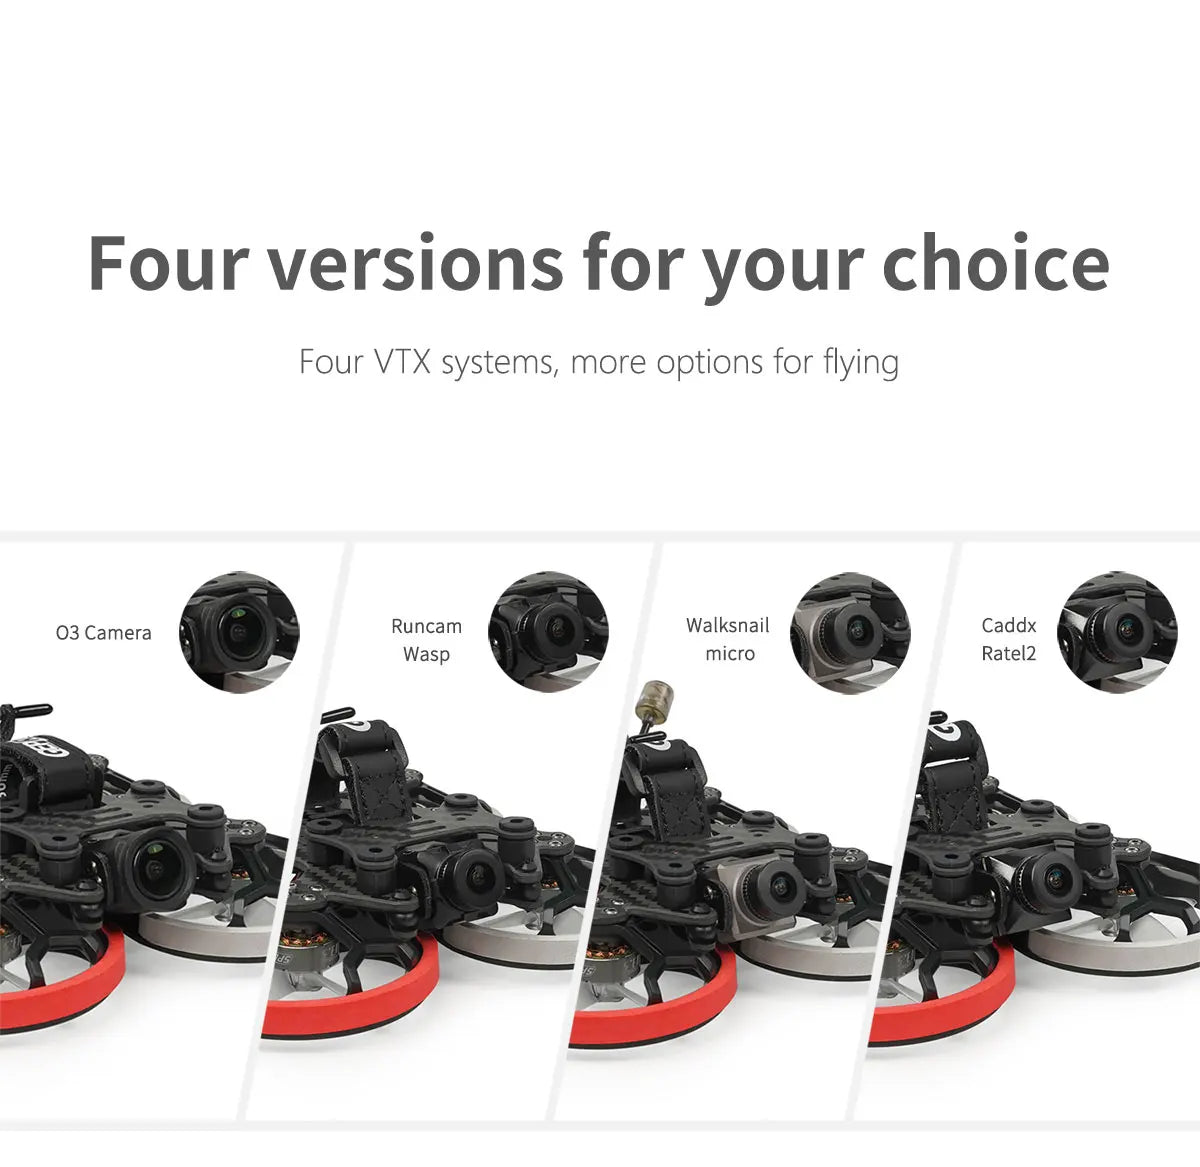 GEPRC Cinelog20 HD - AVATAR Walksnail FPV, GEPRC Cinelog20 HD, four versions for your choice Four VTX systems, more options for flying 03 Camera Runcam